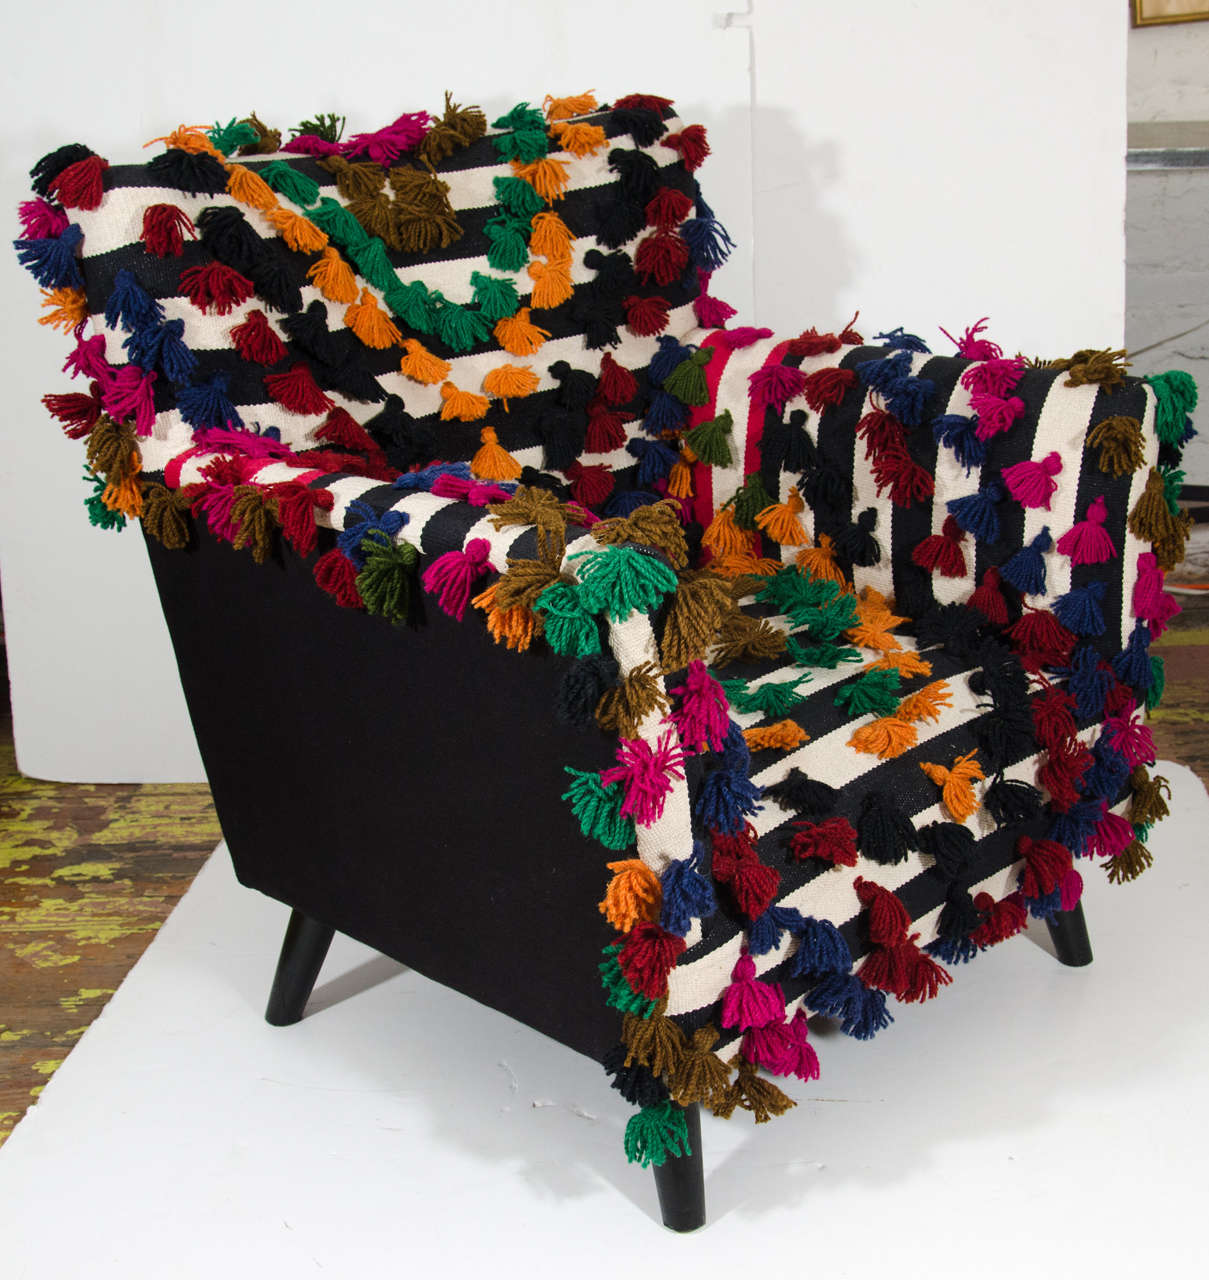 Indian Dhurrie chair with colorful pom-poms, 21st century.